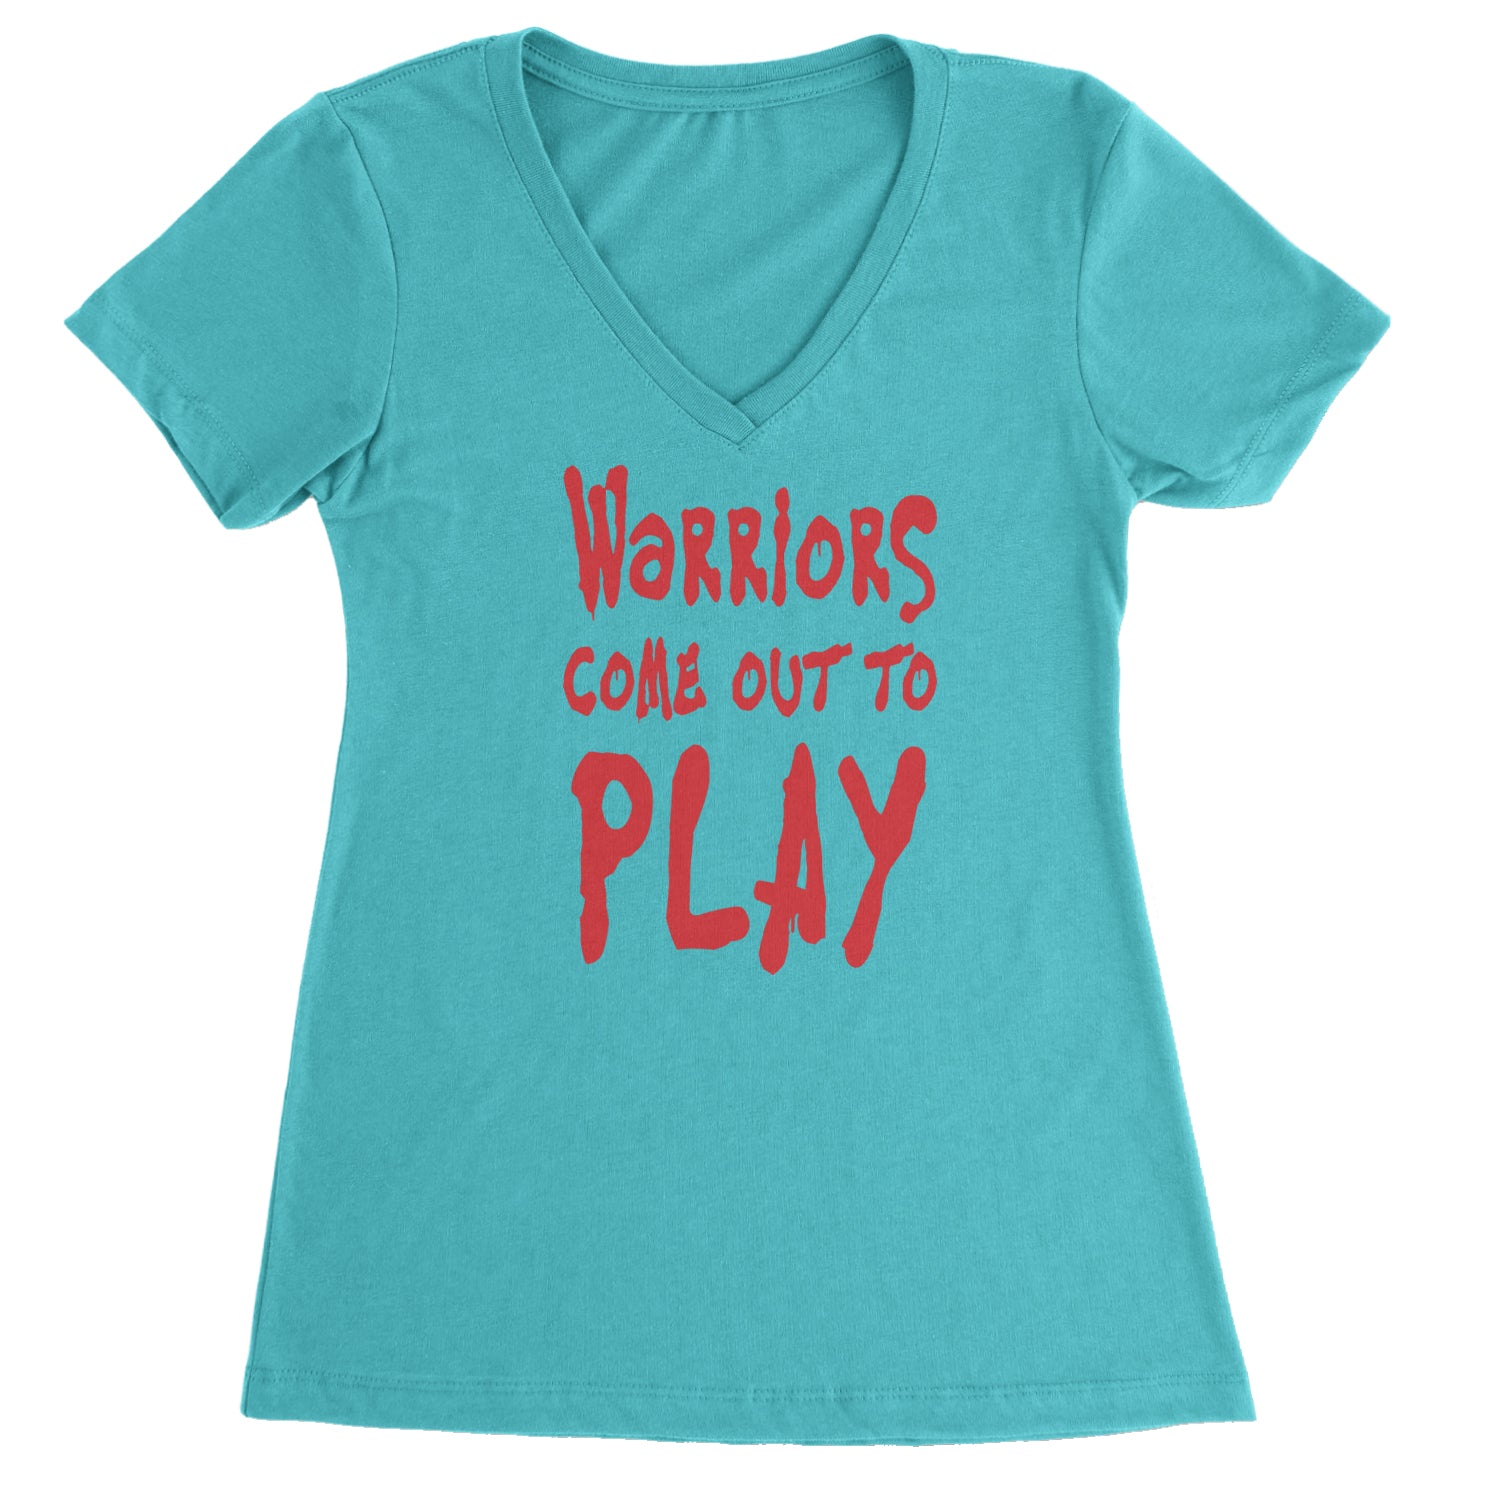 Warriors Come Out To Play  Ladies V-Neck T-shirt Surf